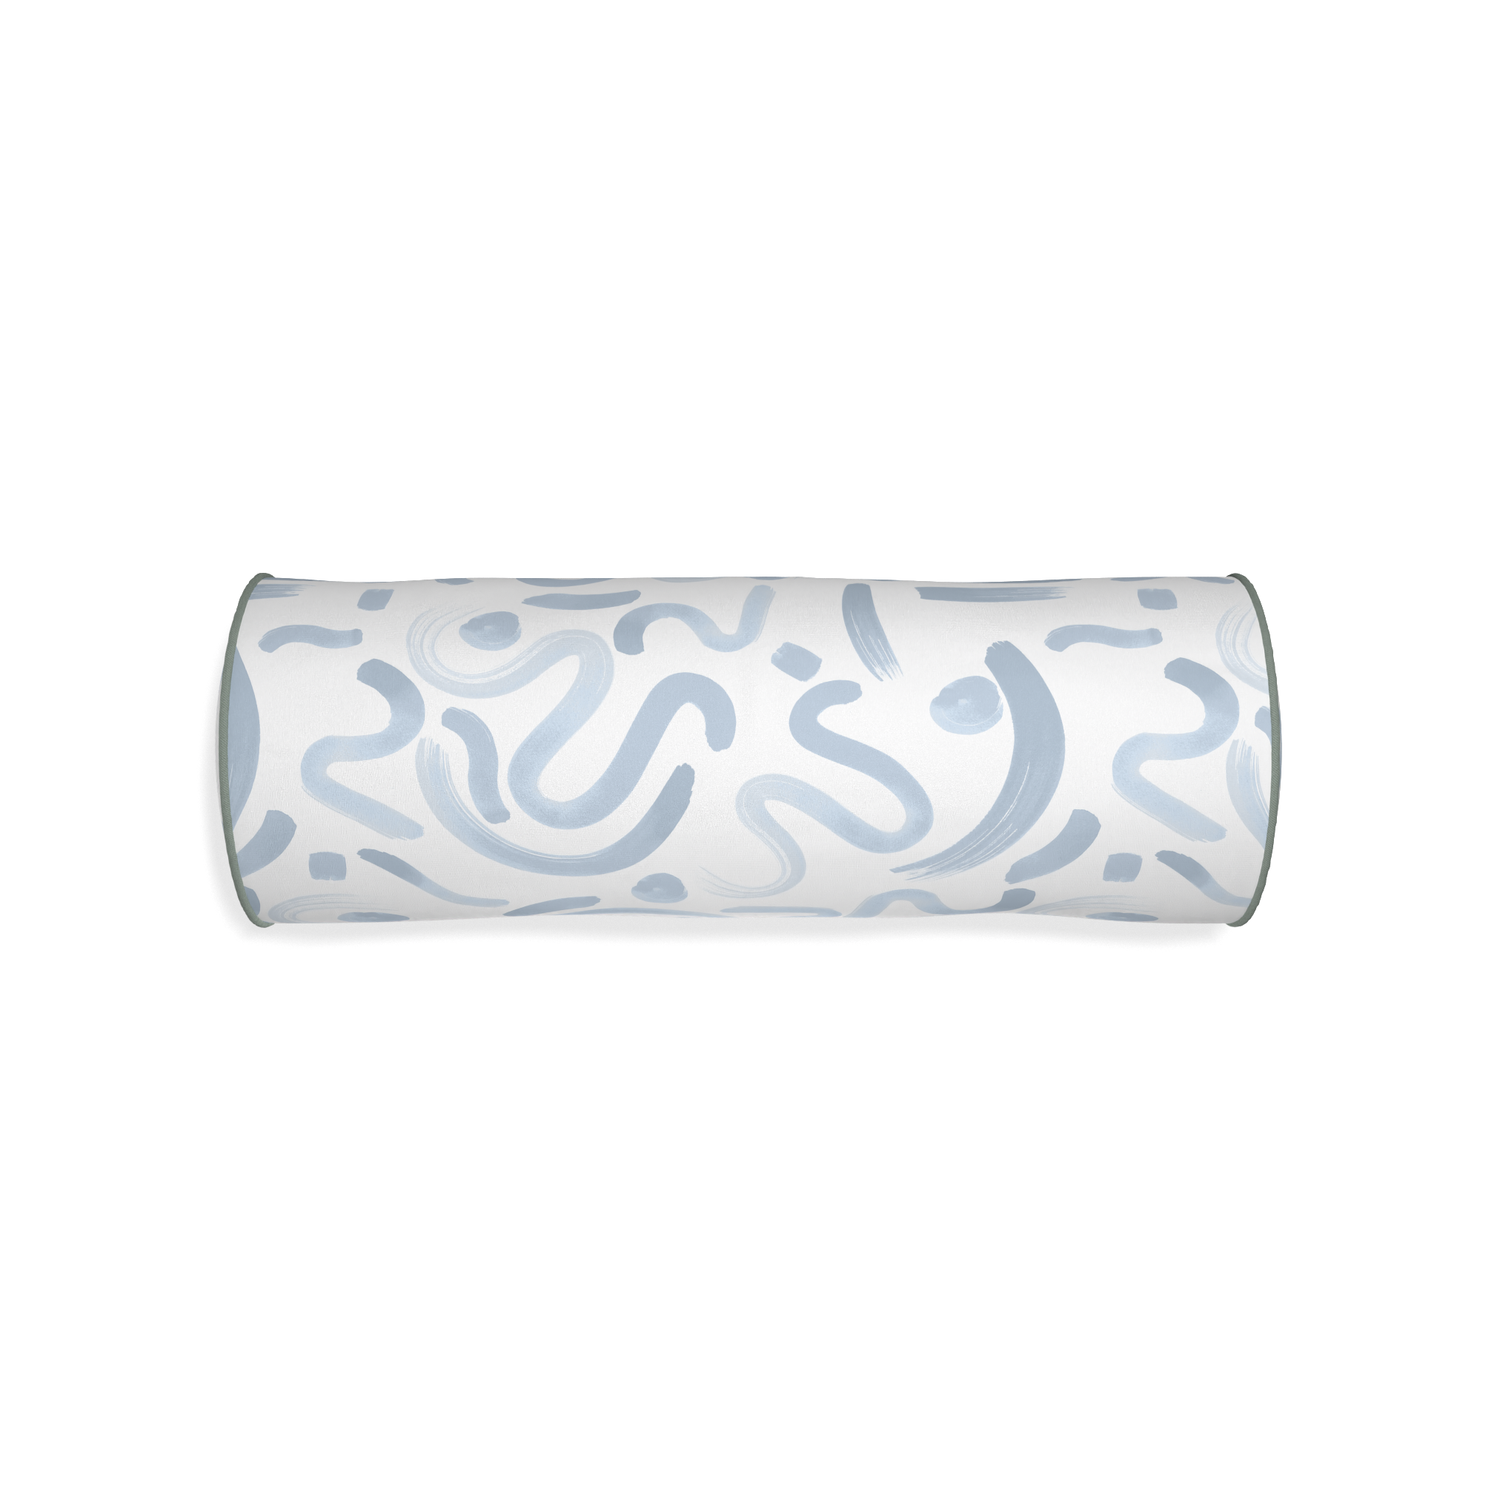 Bolster hockney sky custom abstract sky bluepillow with sage piping on white background